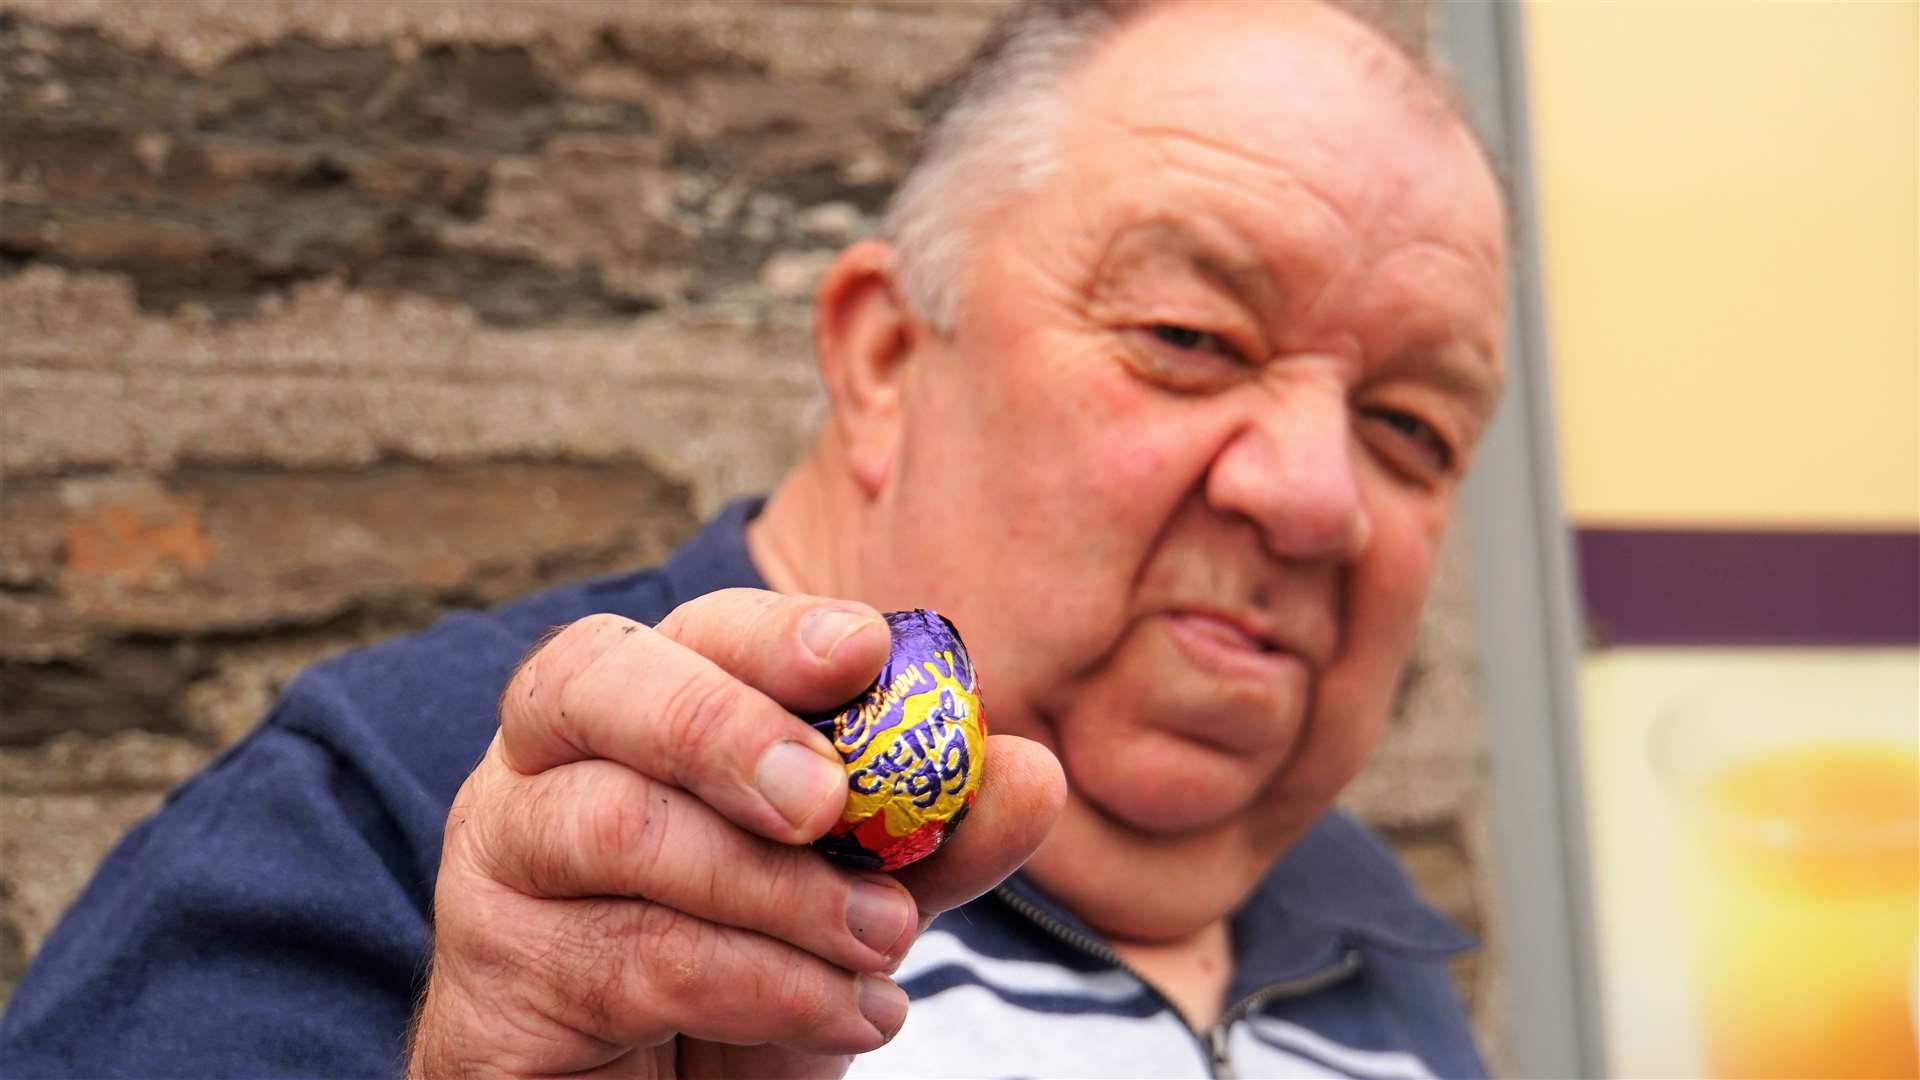 Sandy Barclay from Thurso was delighted to find the winning ticket found under the Creme Egg's wrapper. Pictures: DGS